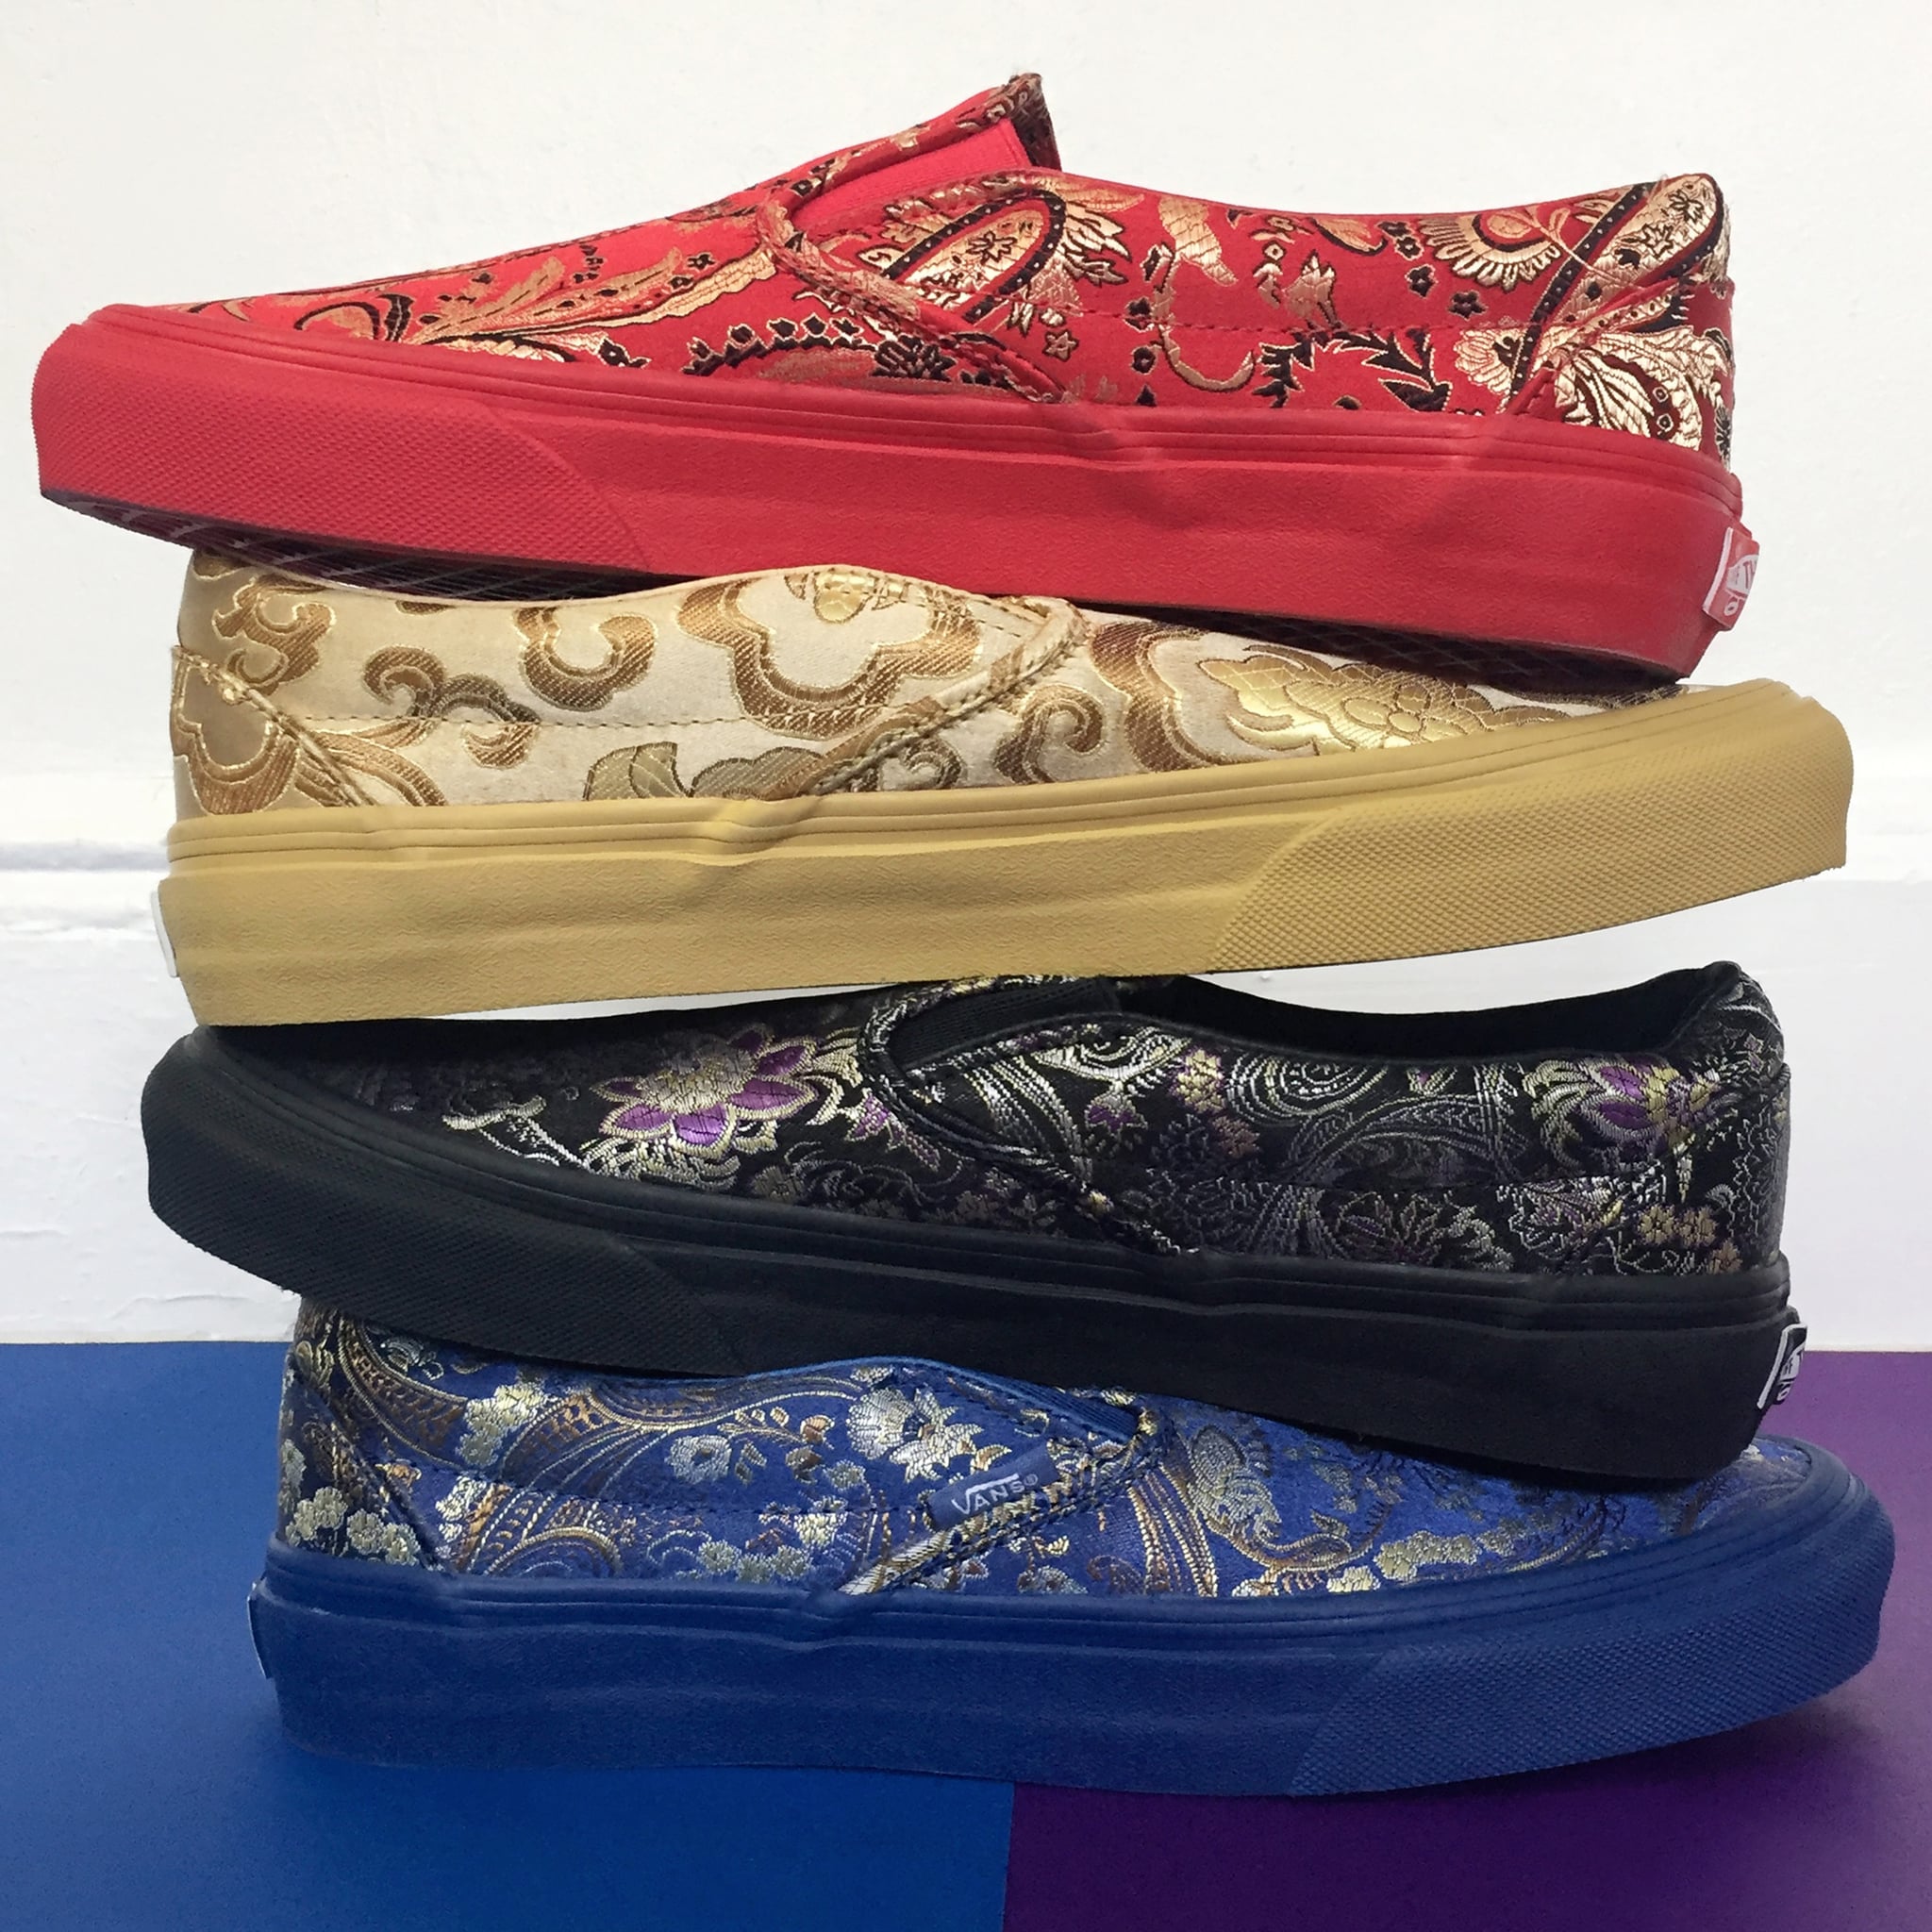 Vans x Opening Ceremony Qi Pao Shoes 